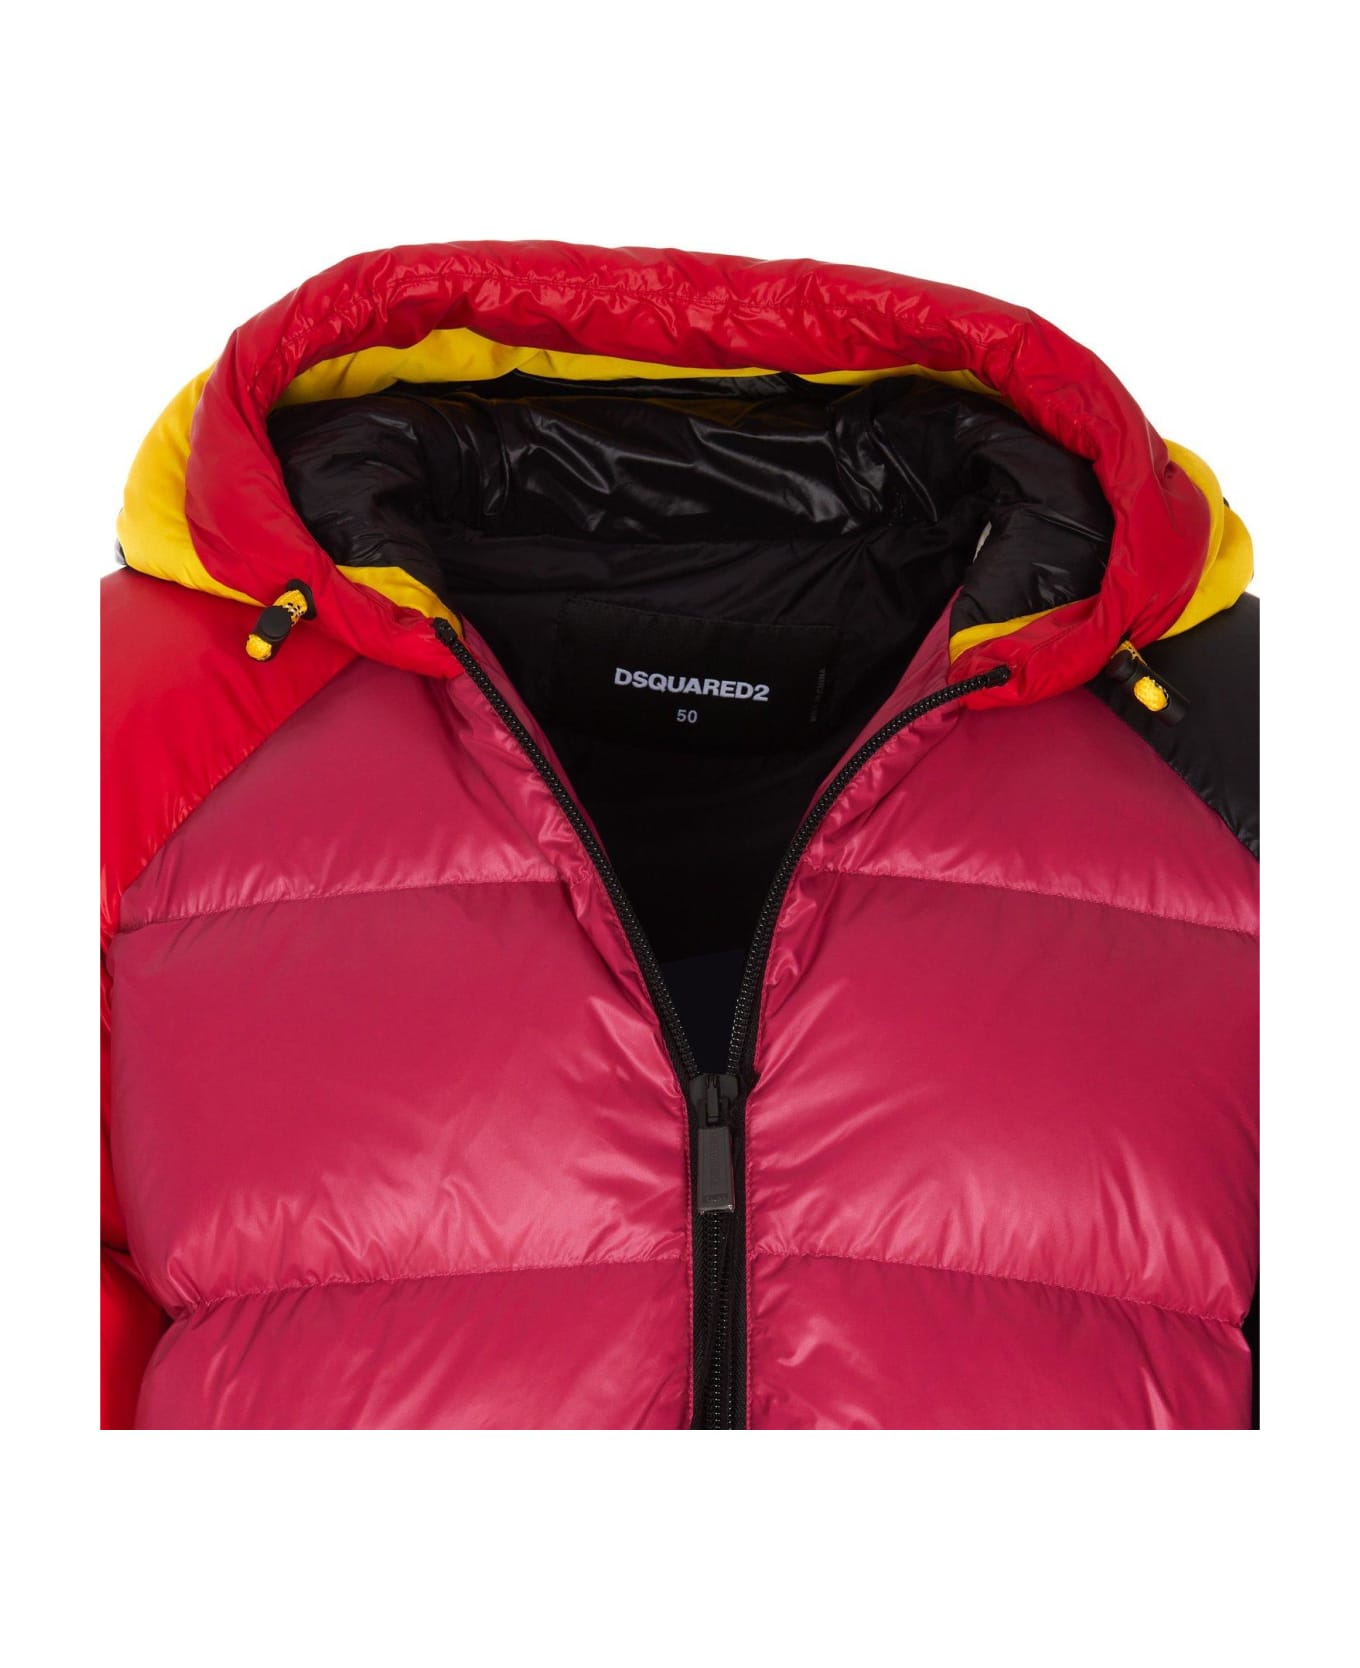 Dsquared2 Crest Puffer Jacket - Red